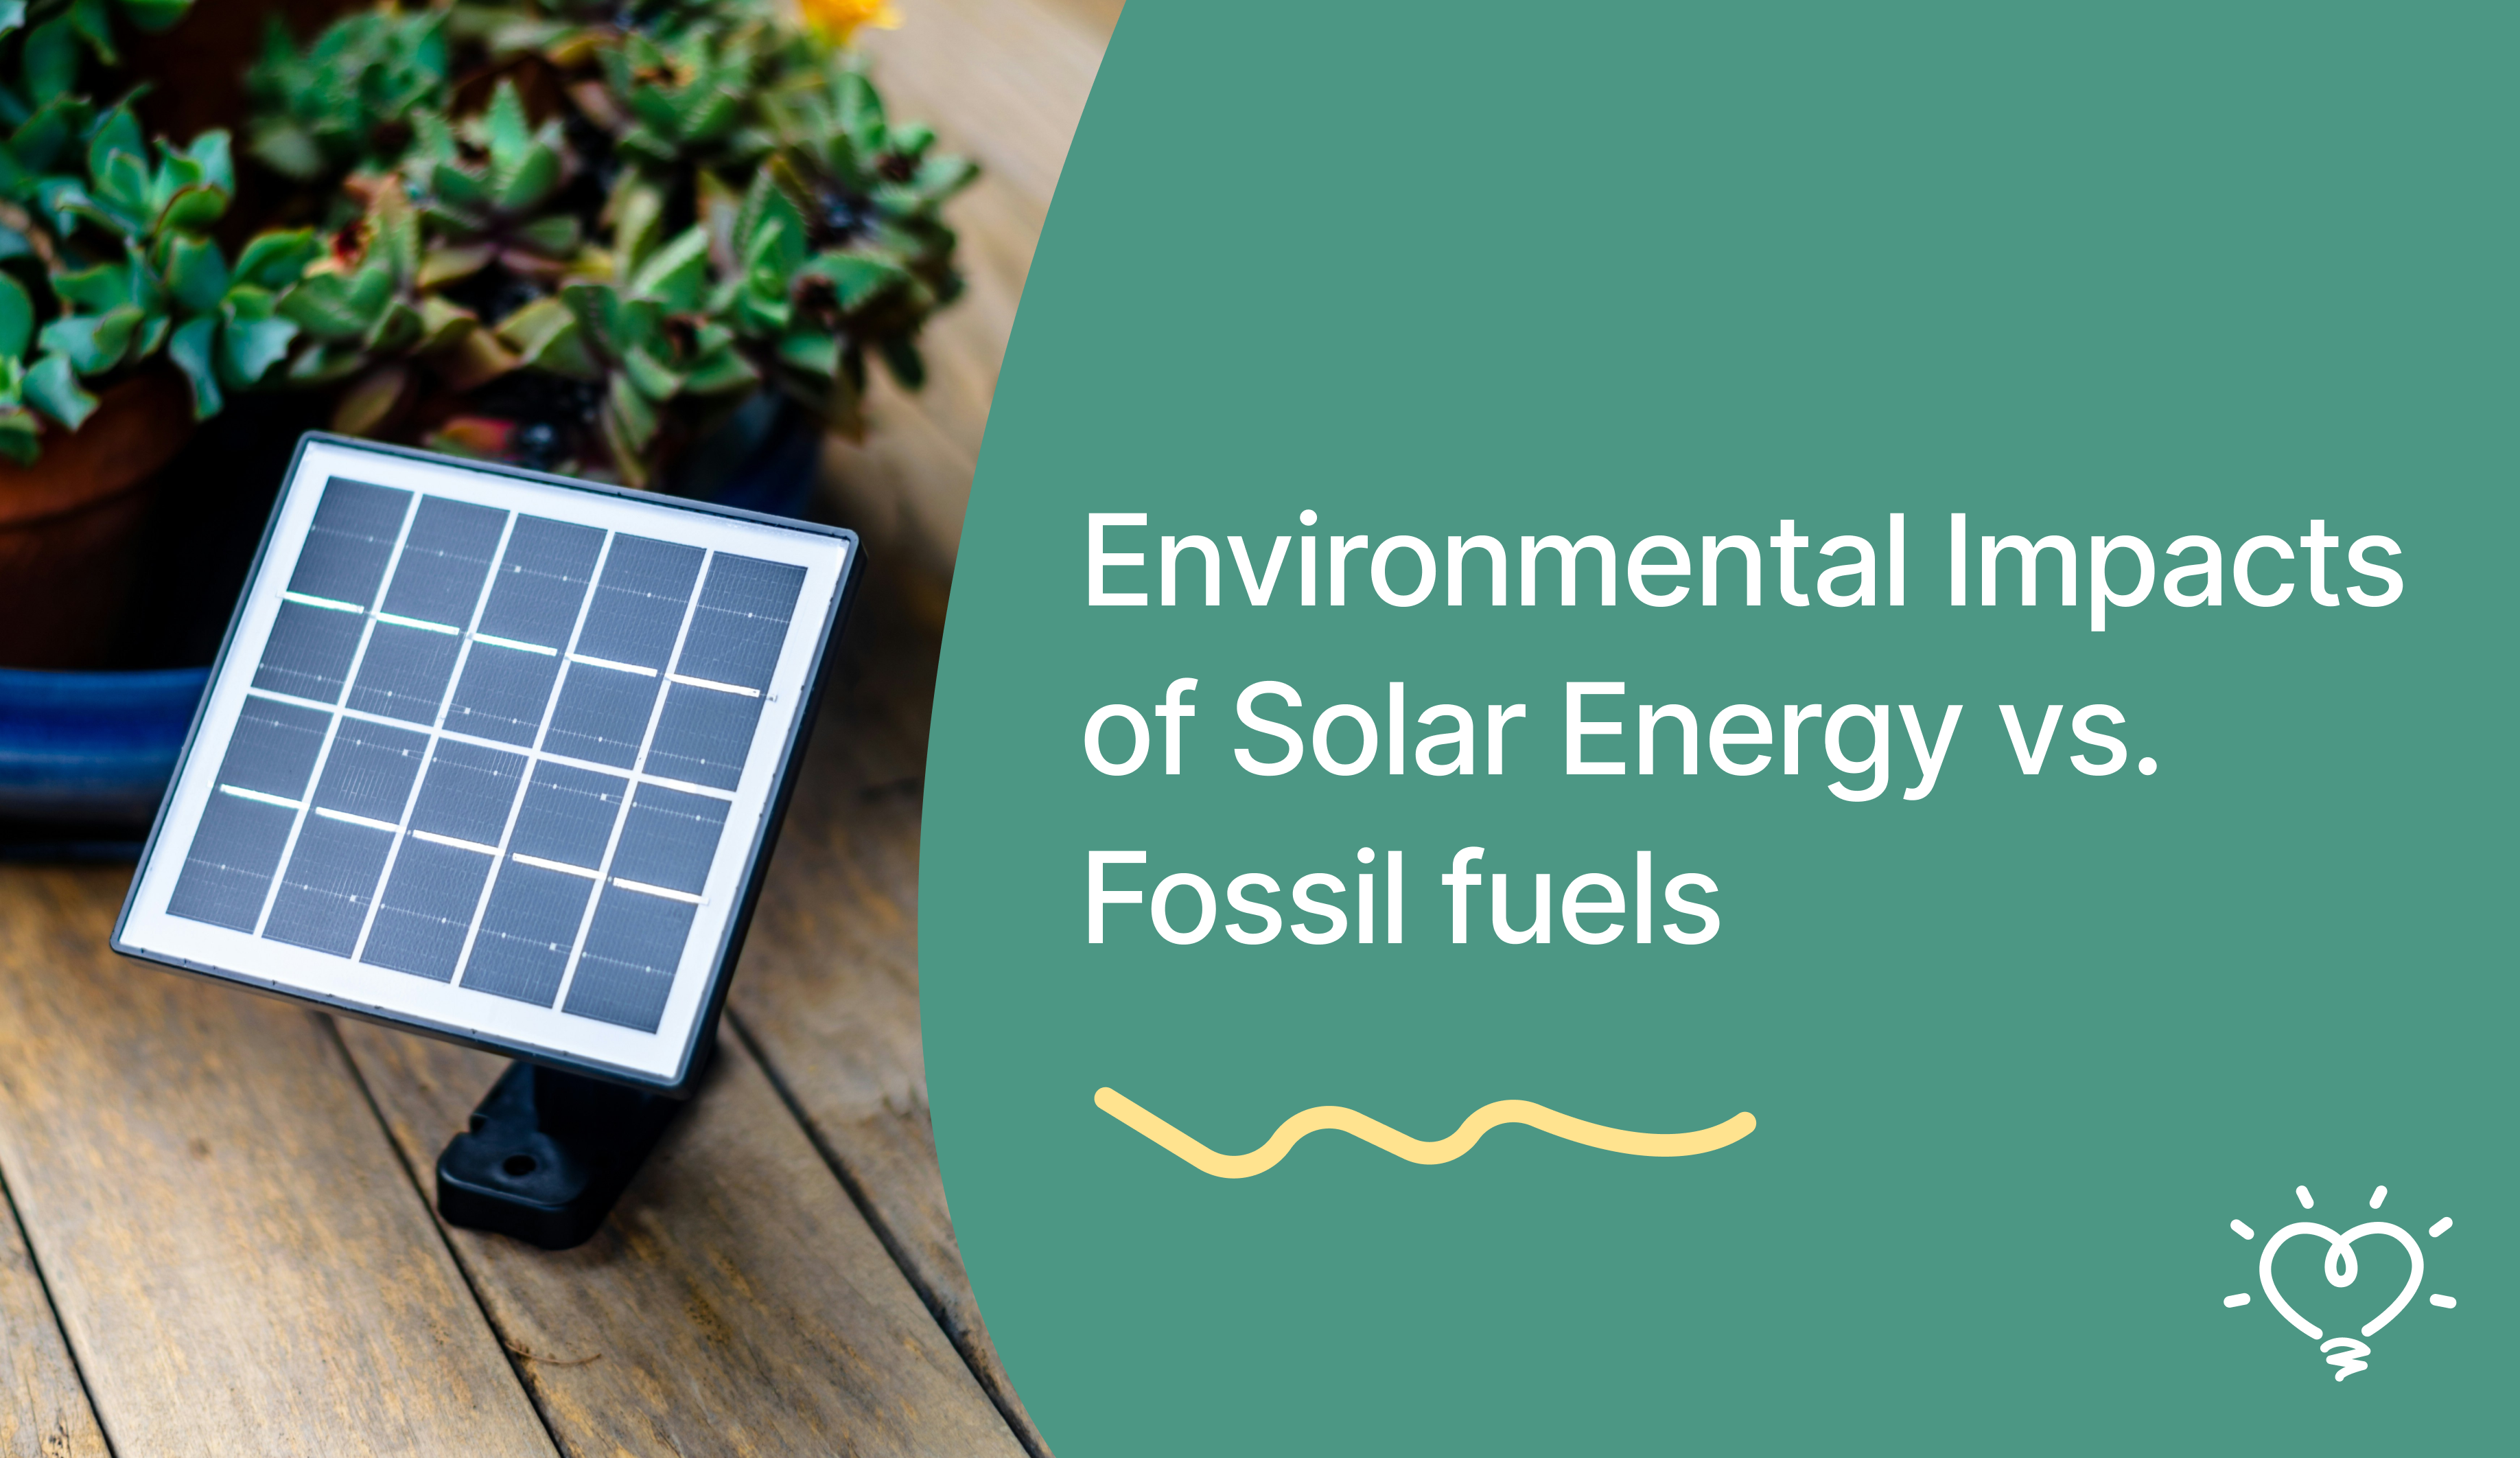 Solar Energy vs. Fossil Fuels: A Comparison of Environmental Impacts